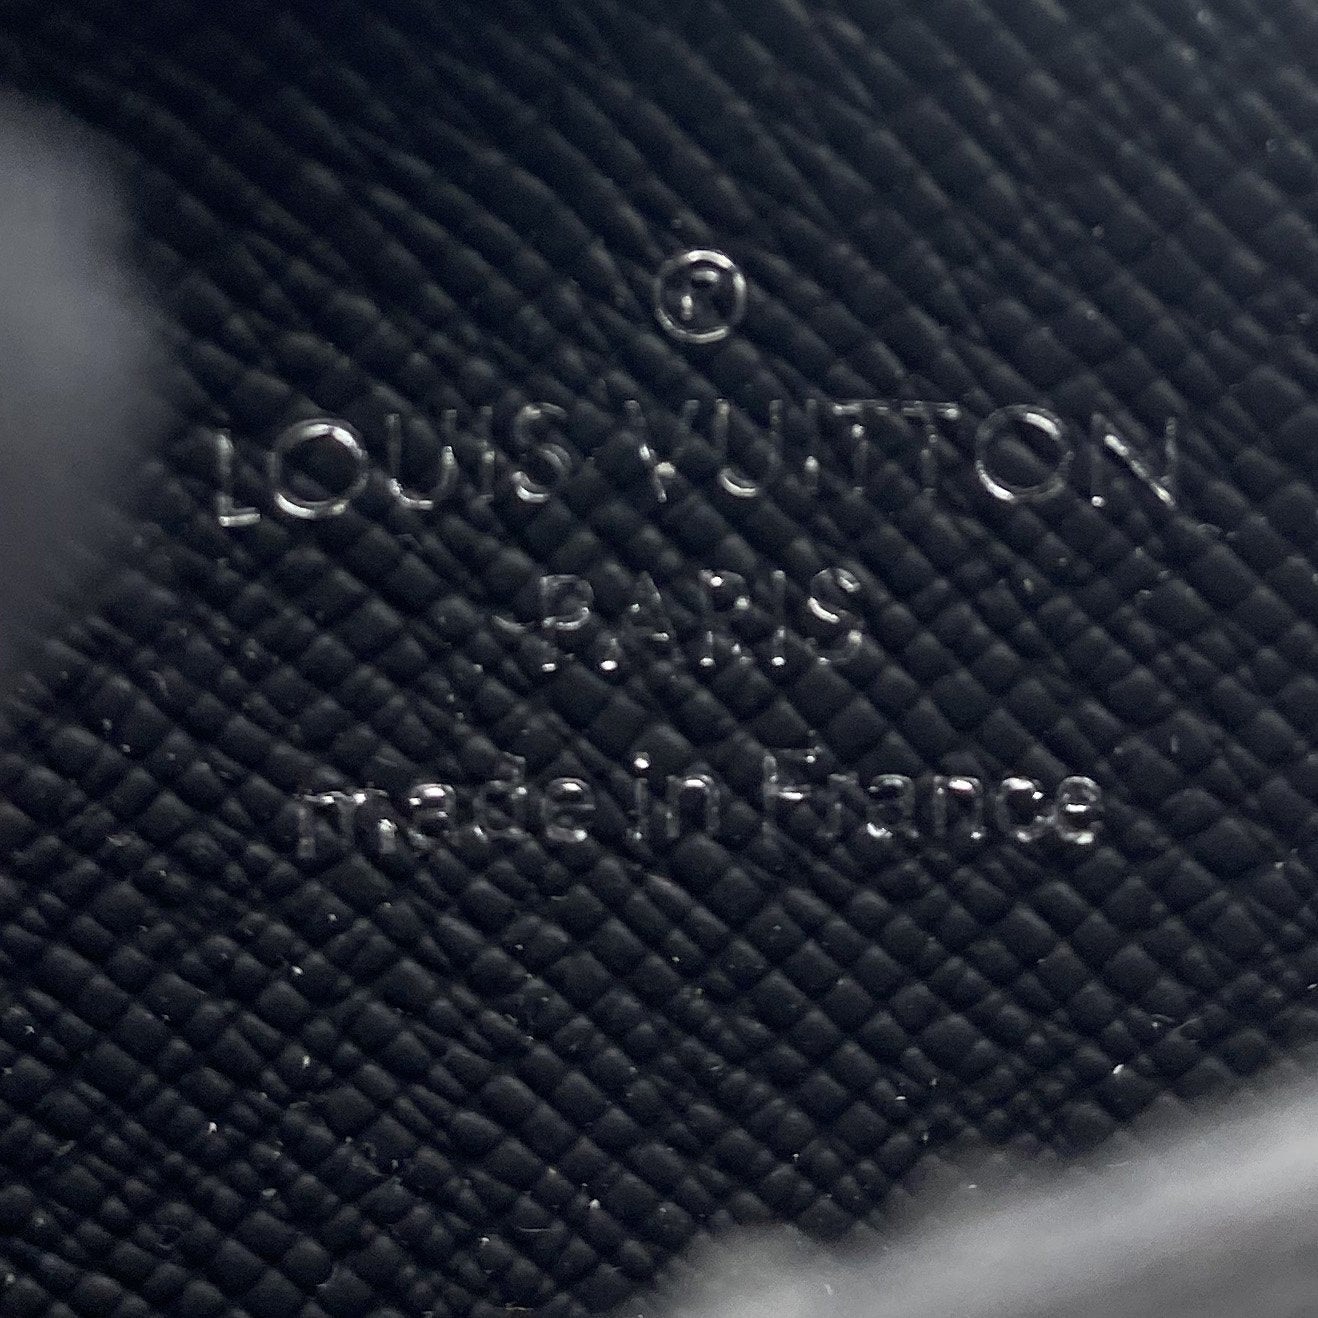 Louis Vuitton Double Card Holder Monogram Eclipse Canvas - BOX AND WALLET  ONLY!